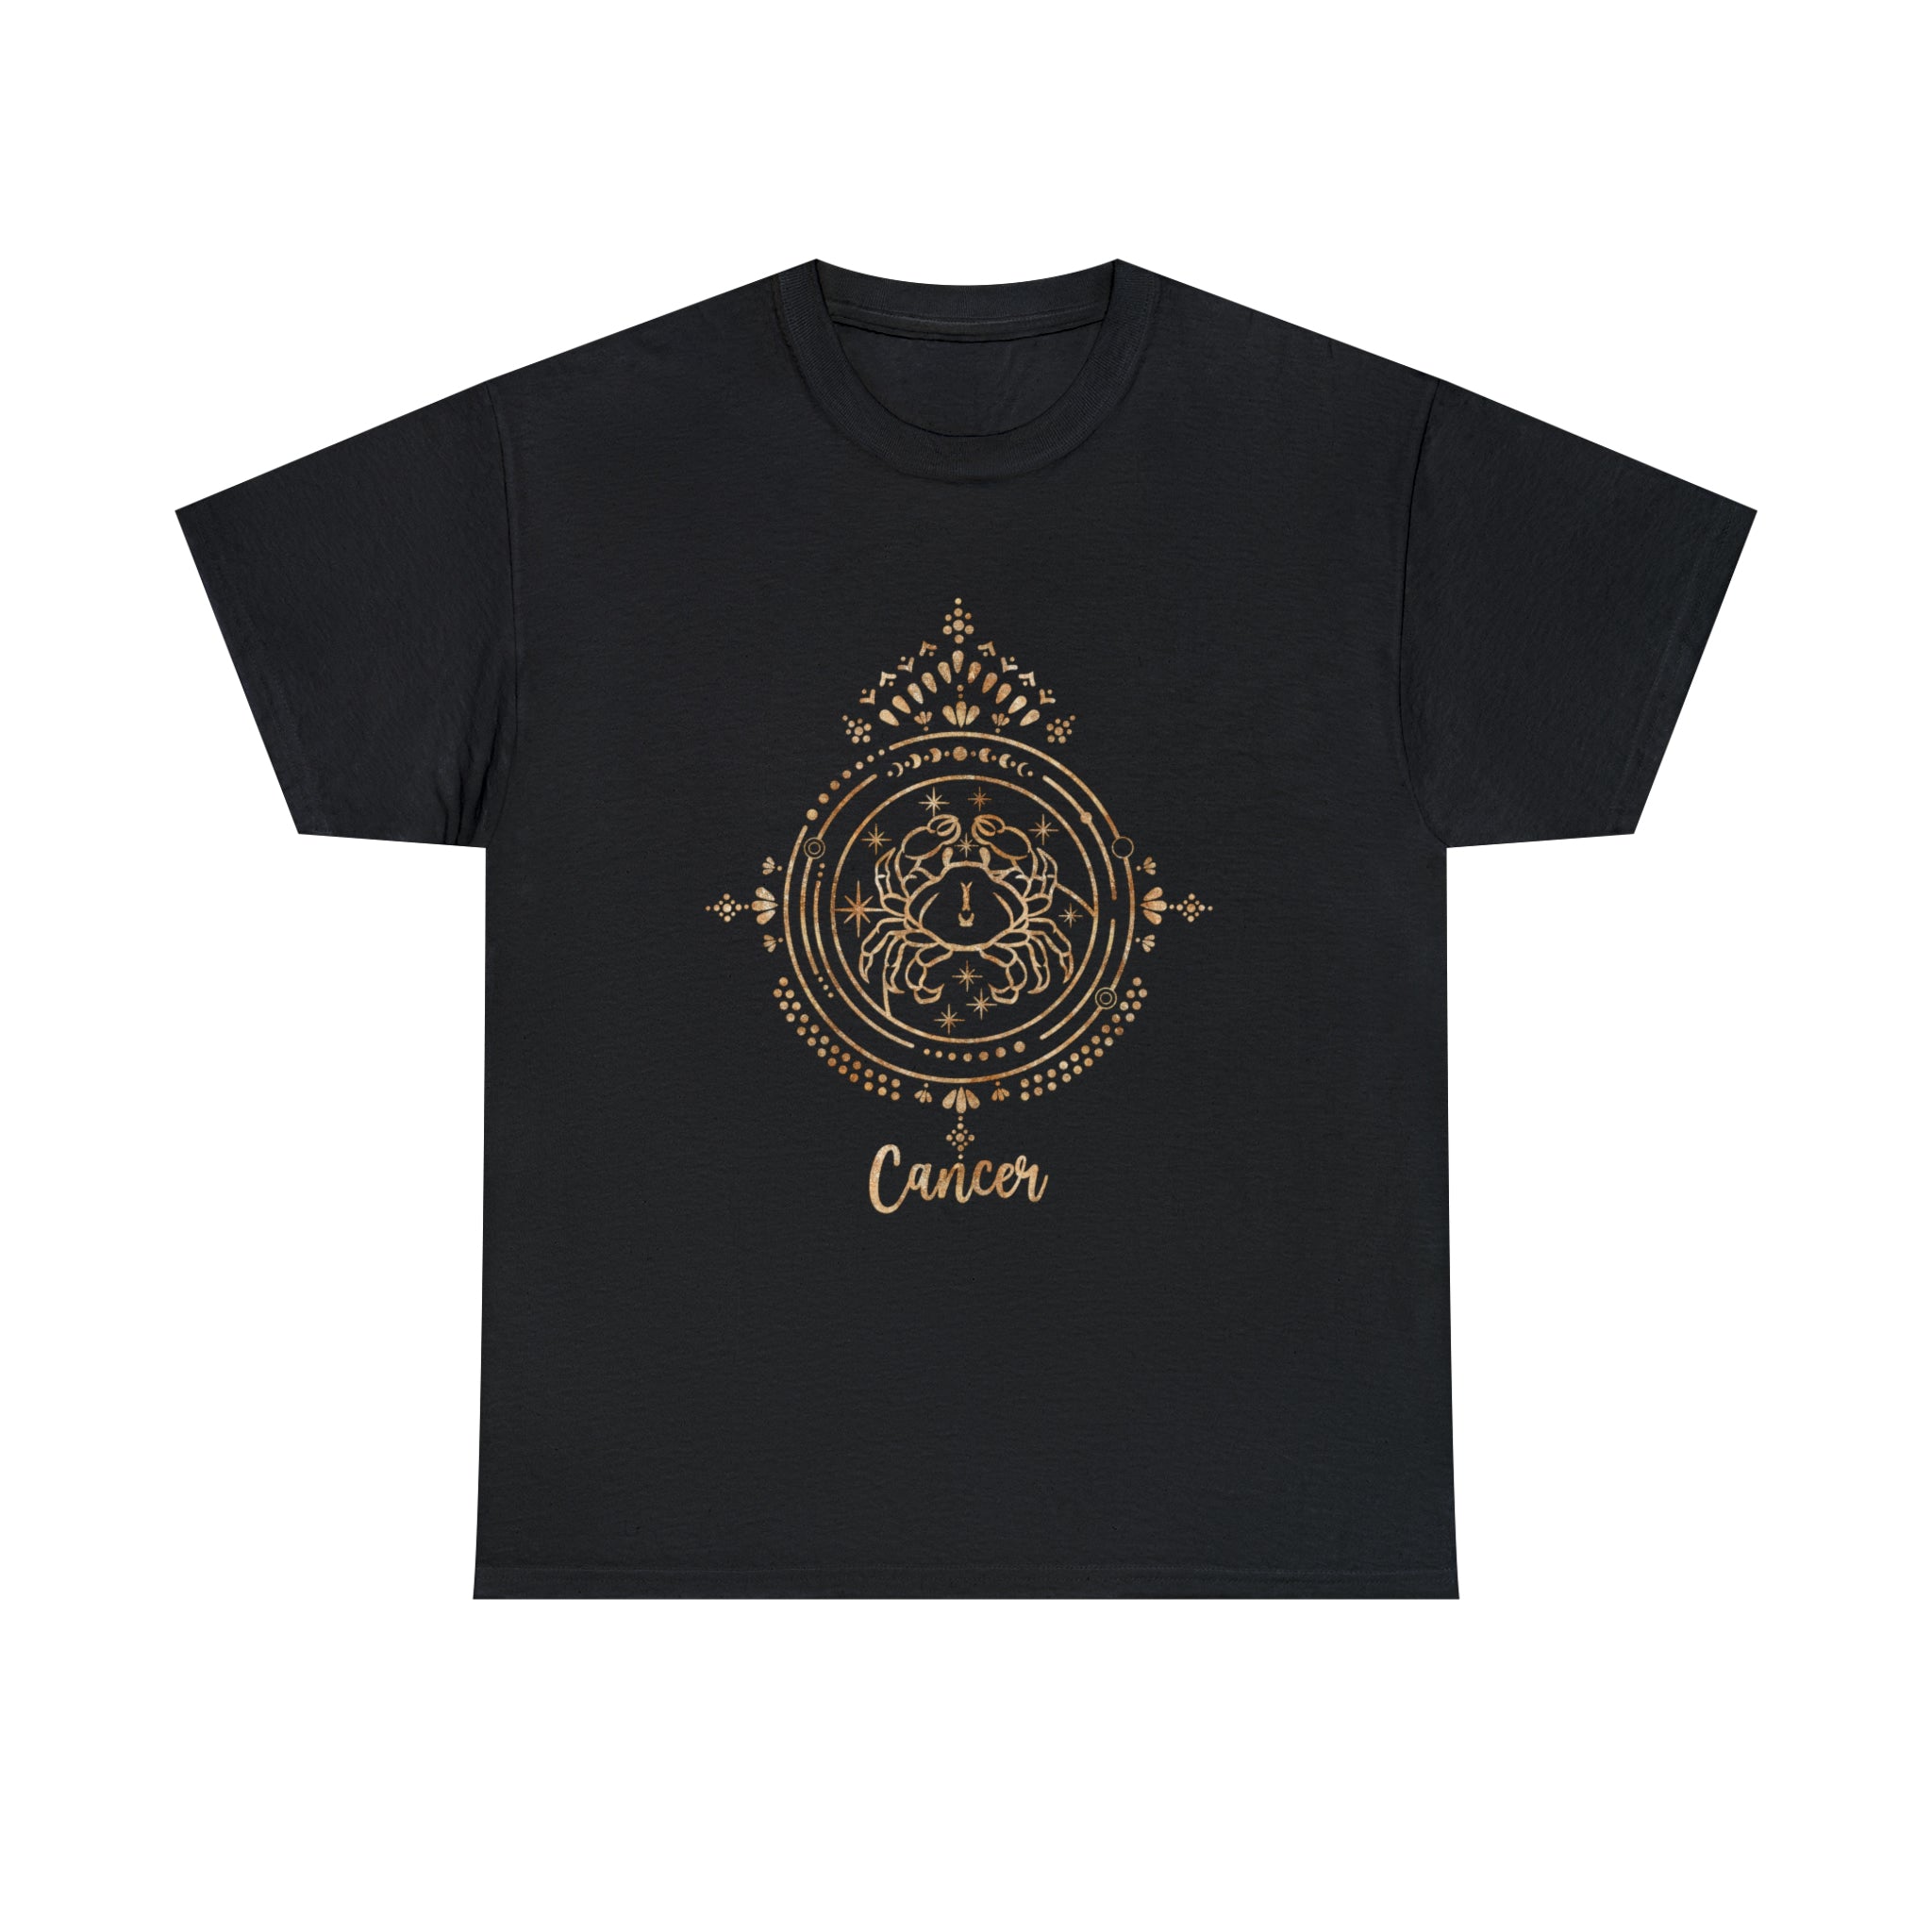 A Cancer black t-shirt with a gold design on it from Printify.